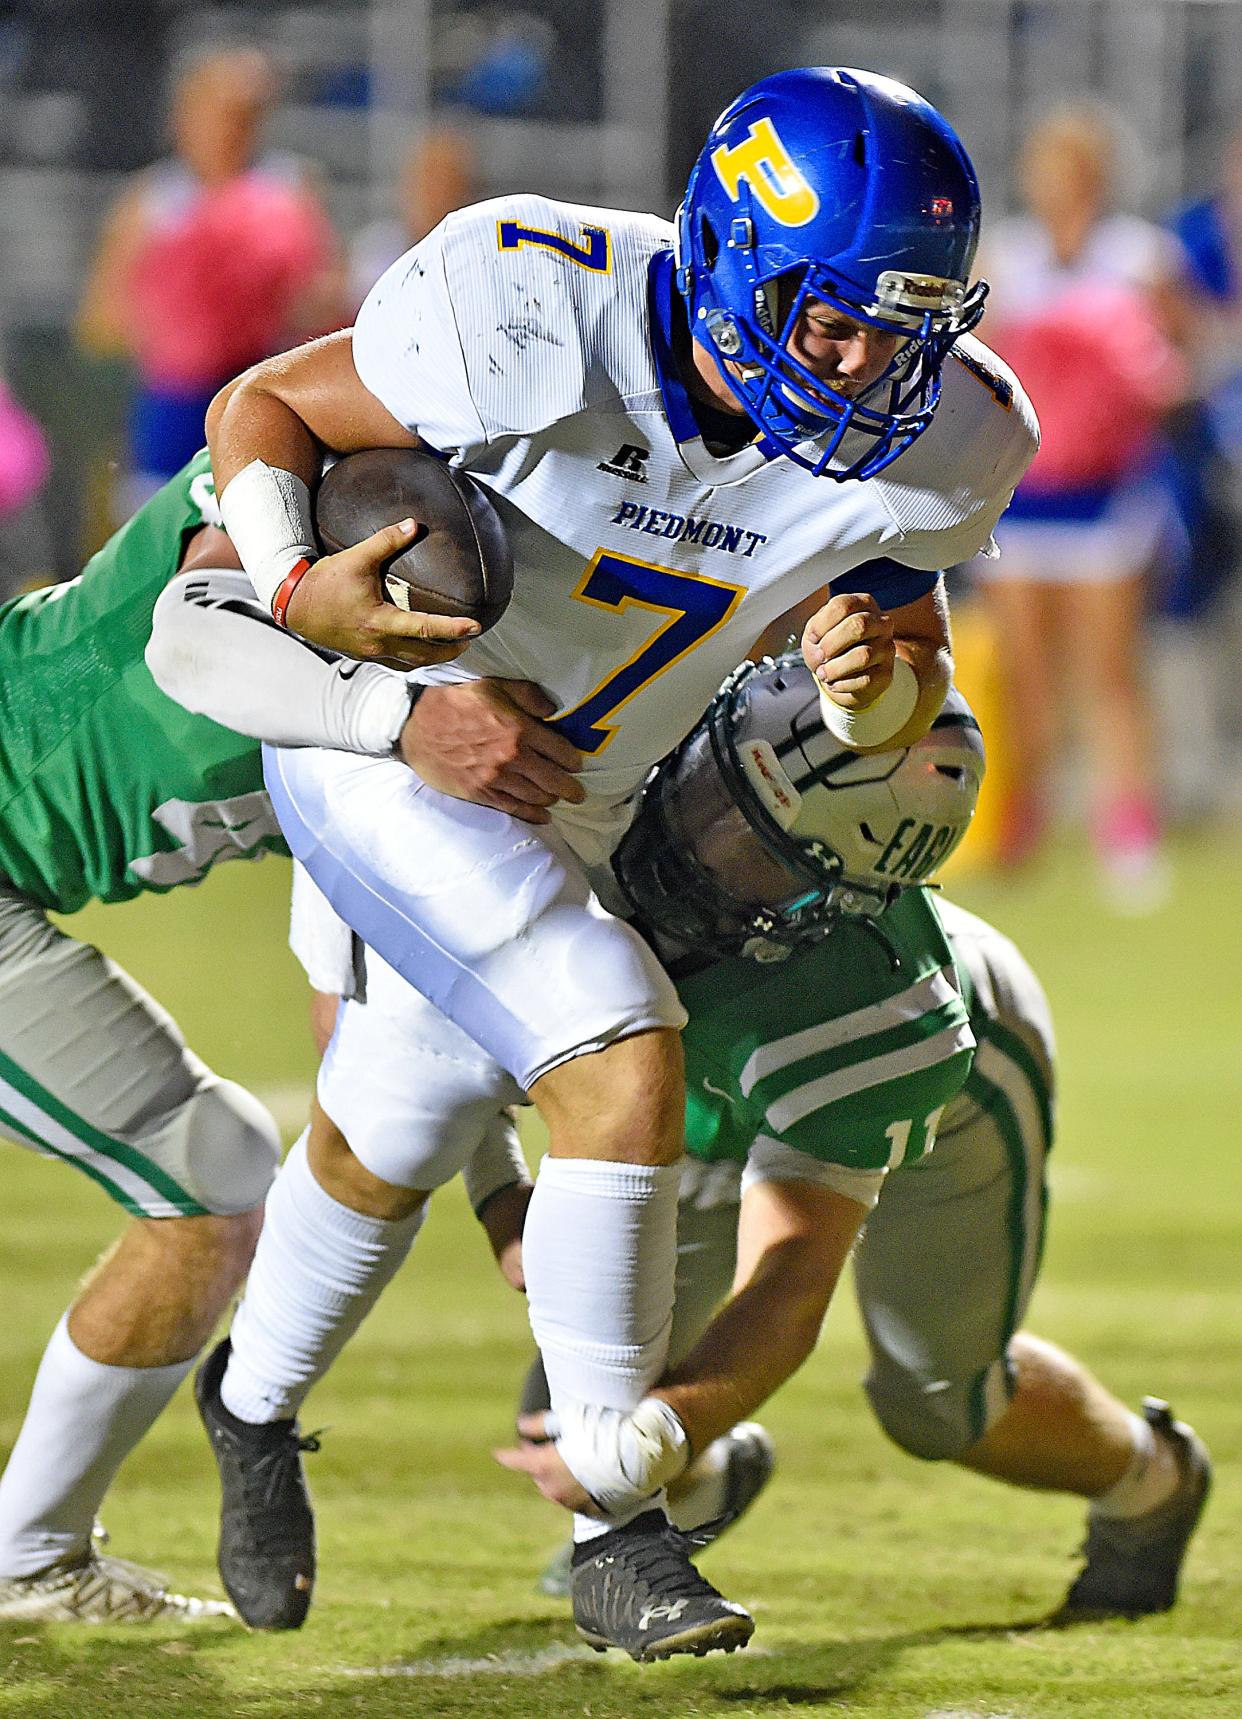 Piedmont quarterback Aaron Jackson Hayes tries to evade the tackle of Hokes Bluff's Layton Horne during high school football action in Hokes Bluff, Alabama October 15, 2021.